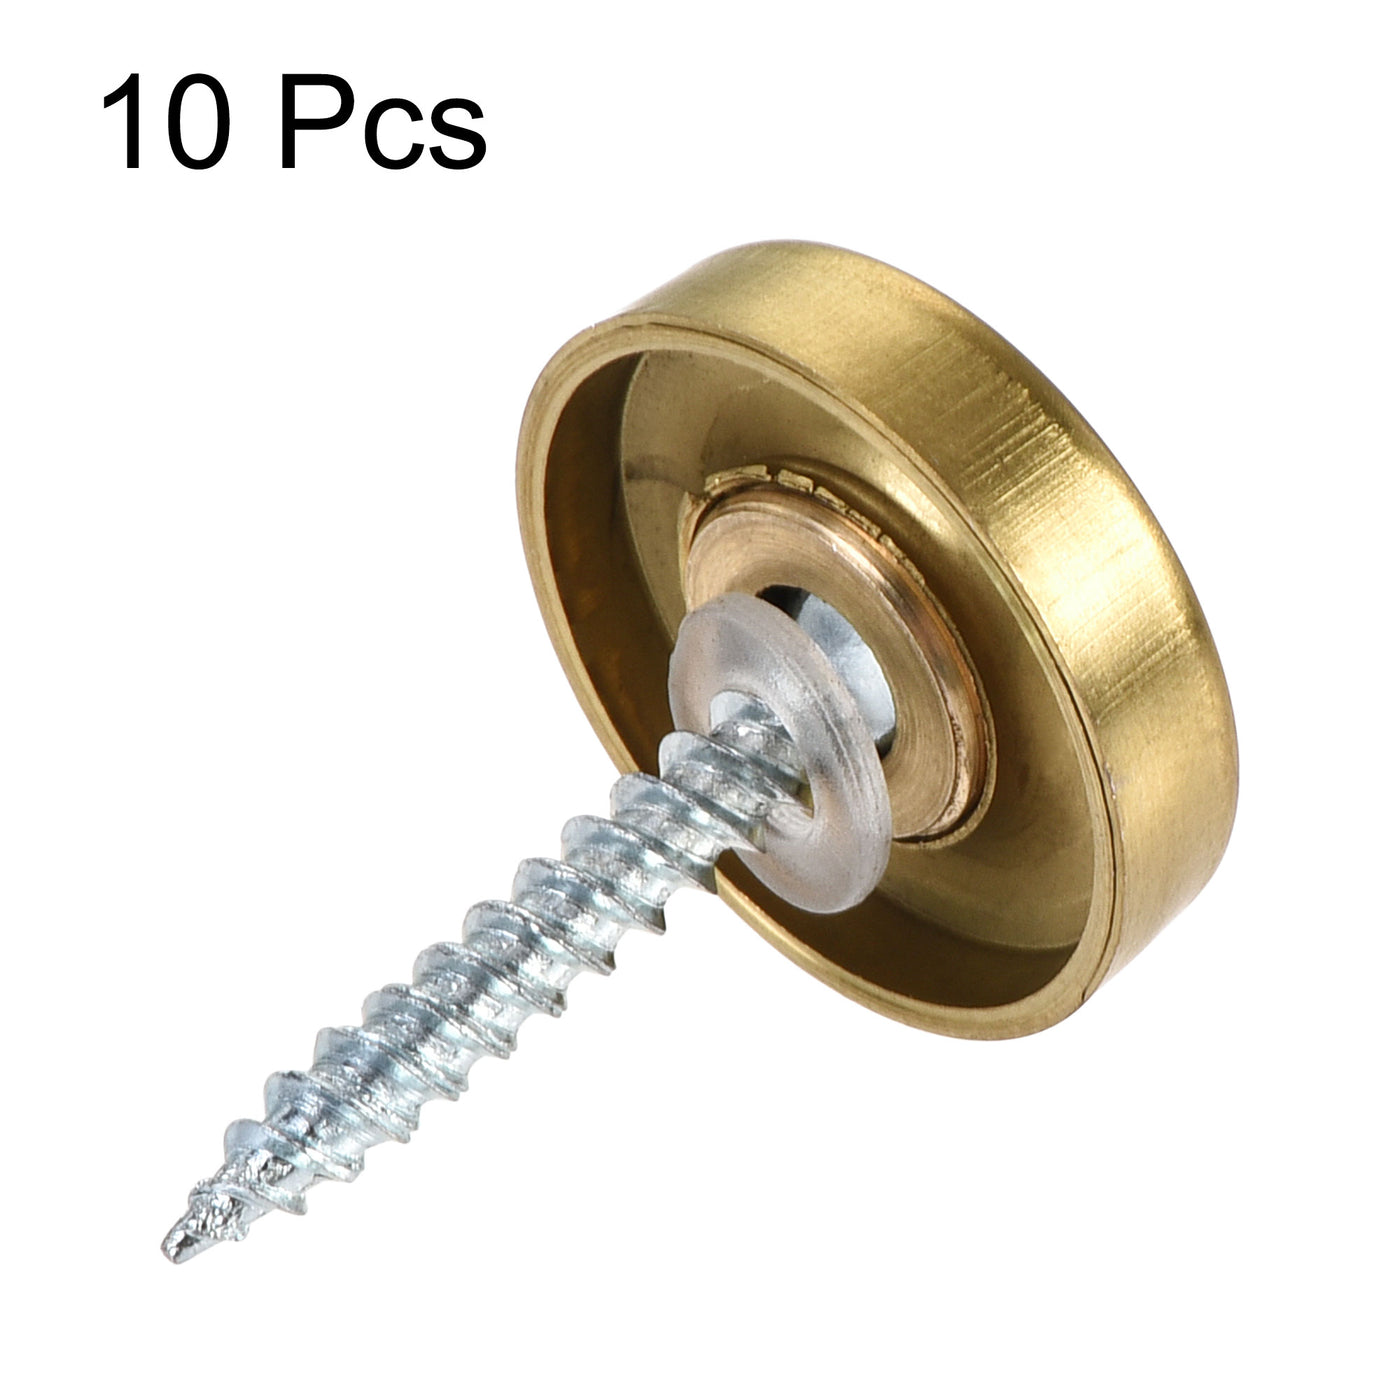 uxcell Uxcell Mirror Screws, 19mm/0.75", 10pcs Decorative Cap Fasteners Cover Nails, Wire Drawing, Gold Tone 304 Stainless Steel